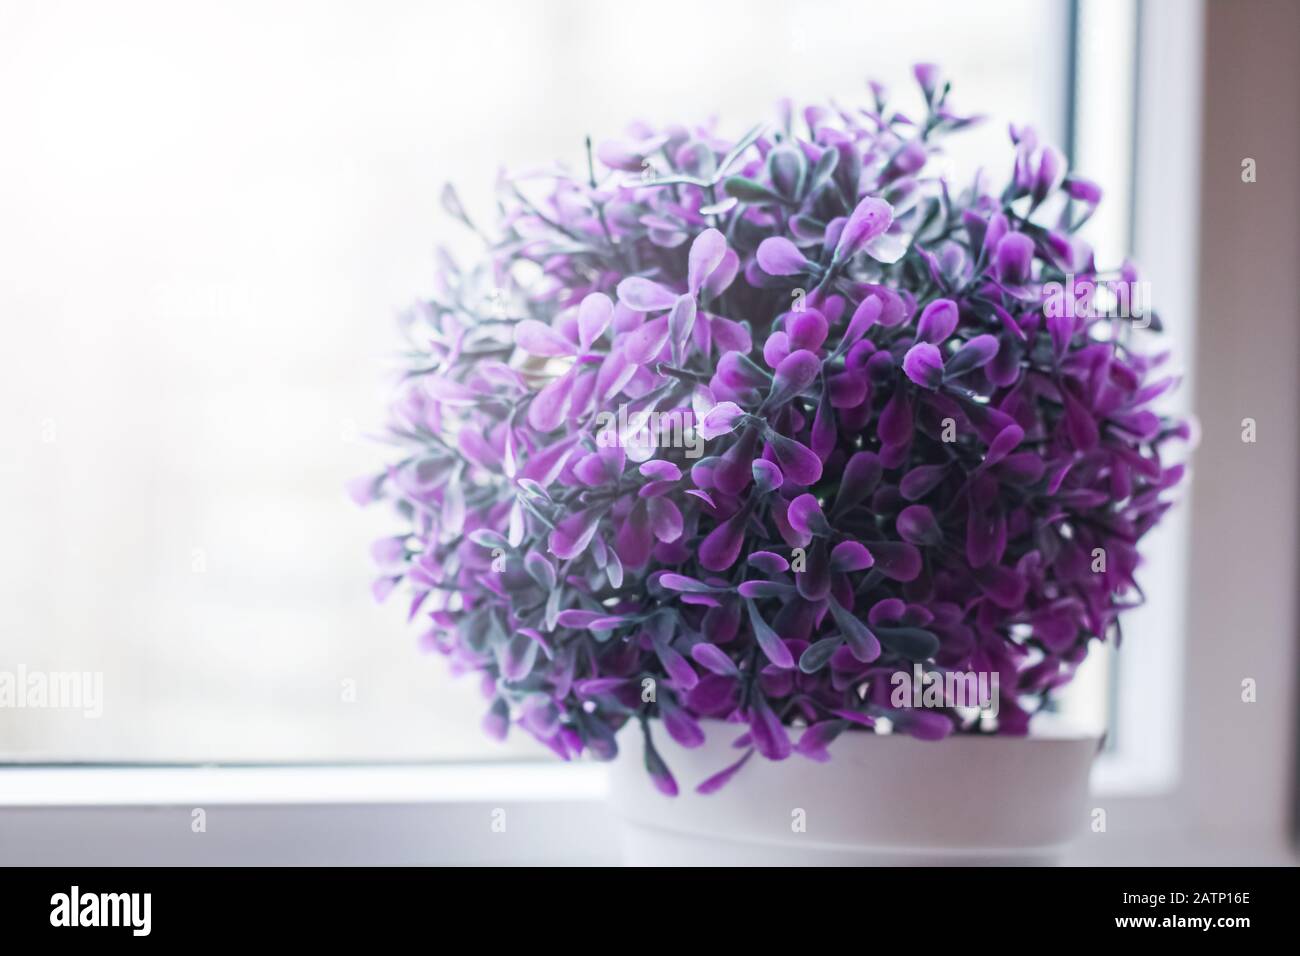 Home plant with purple little flowers on the windowsill Stock Photo